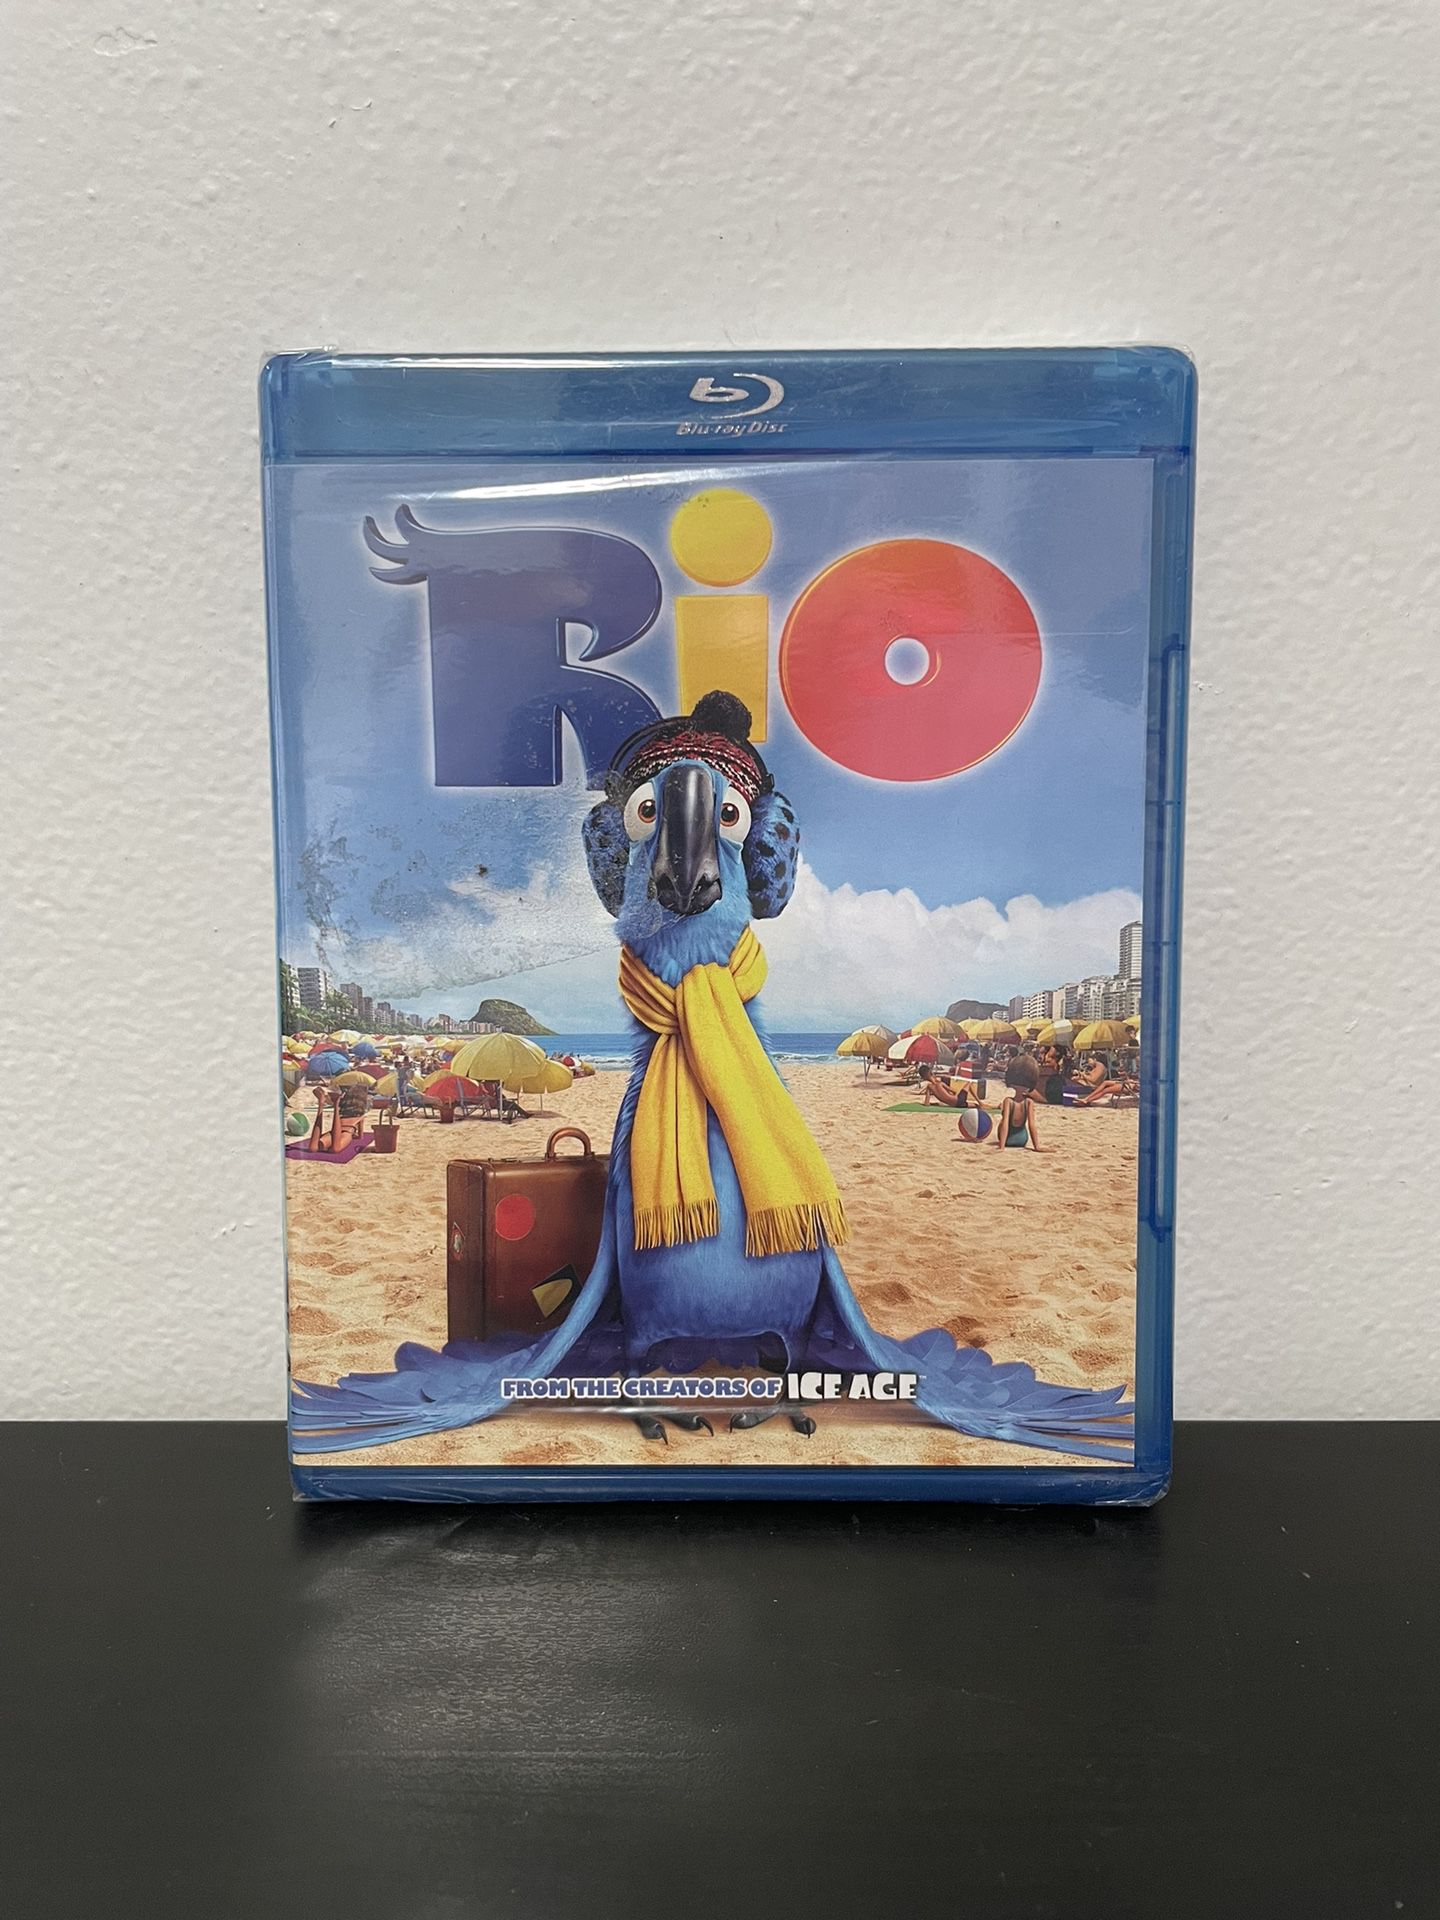 Rio  Blu-Ray  NEW SEALED  Animated Movie Family Kids Comedy Anne Hathaway 2011